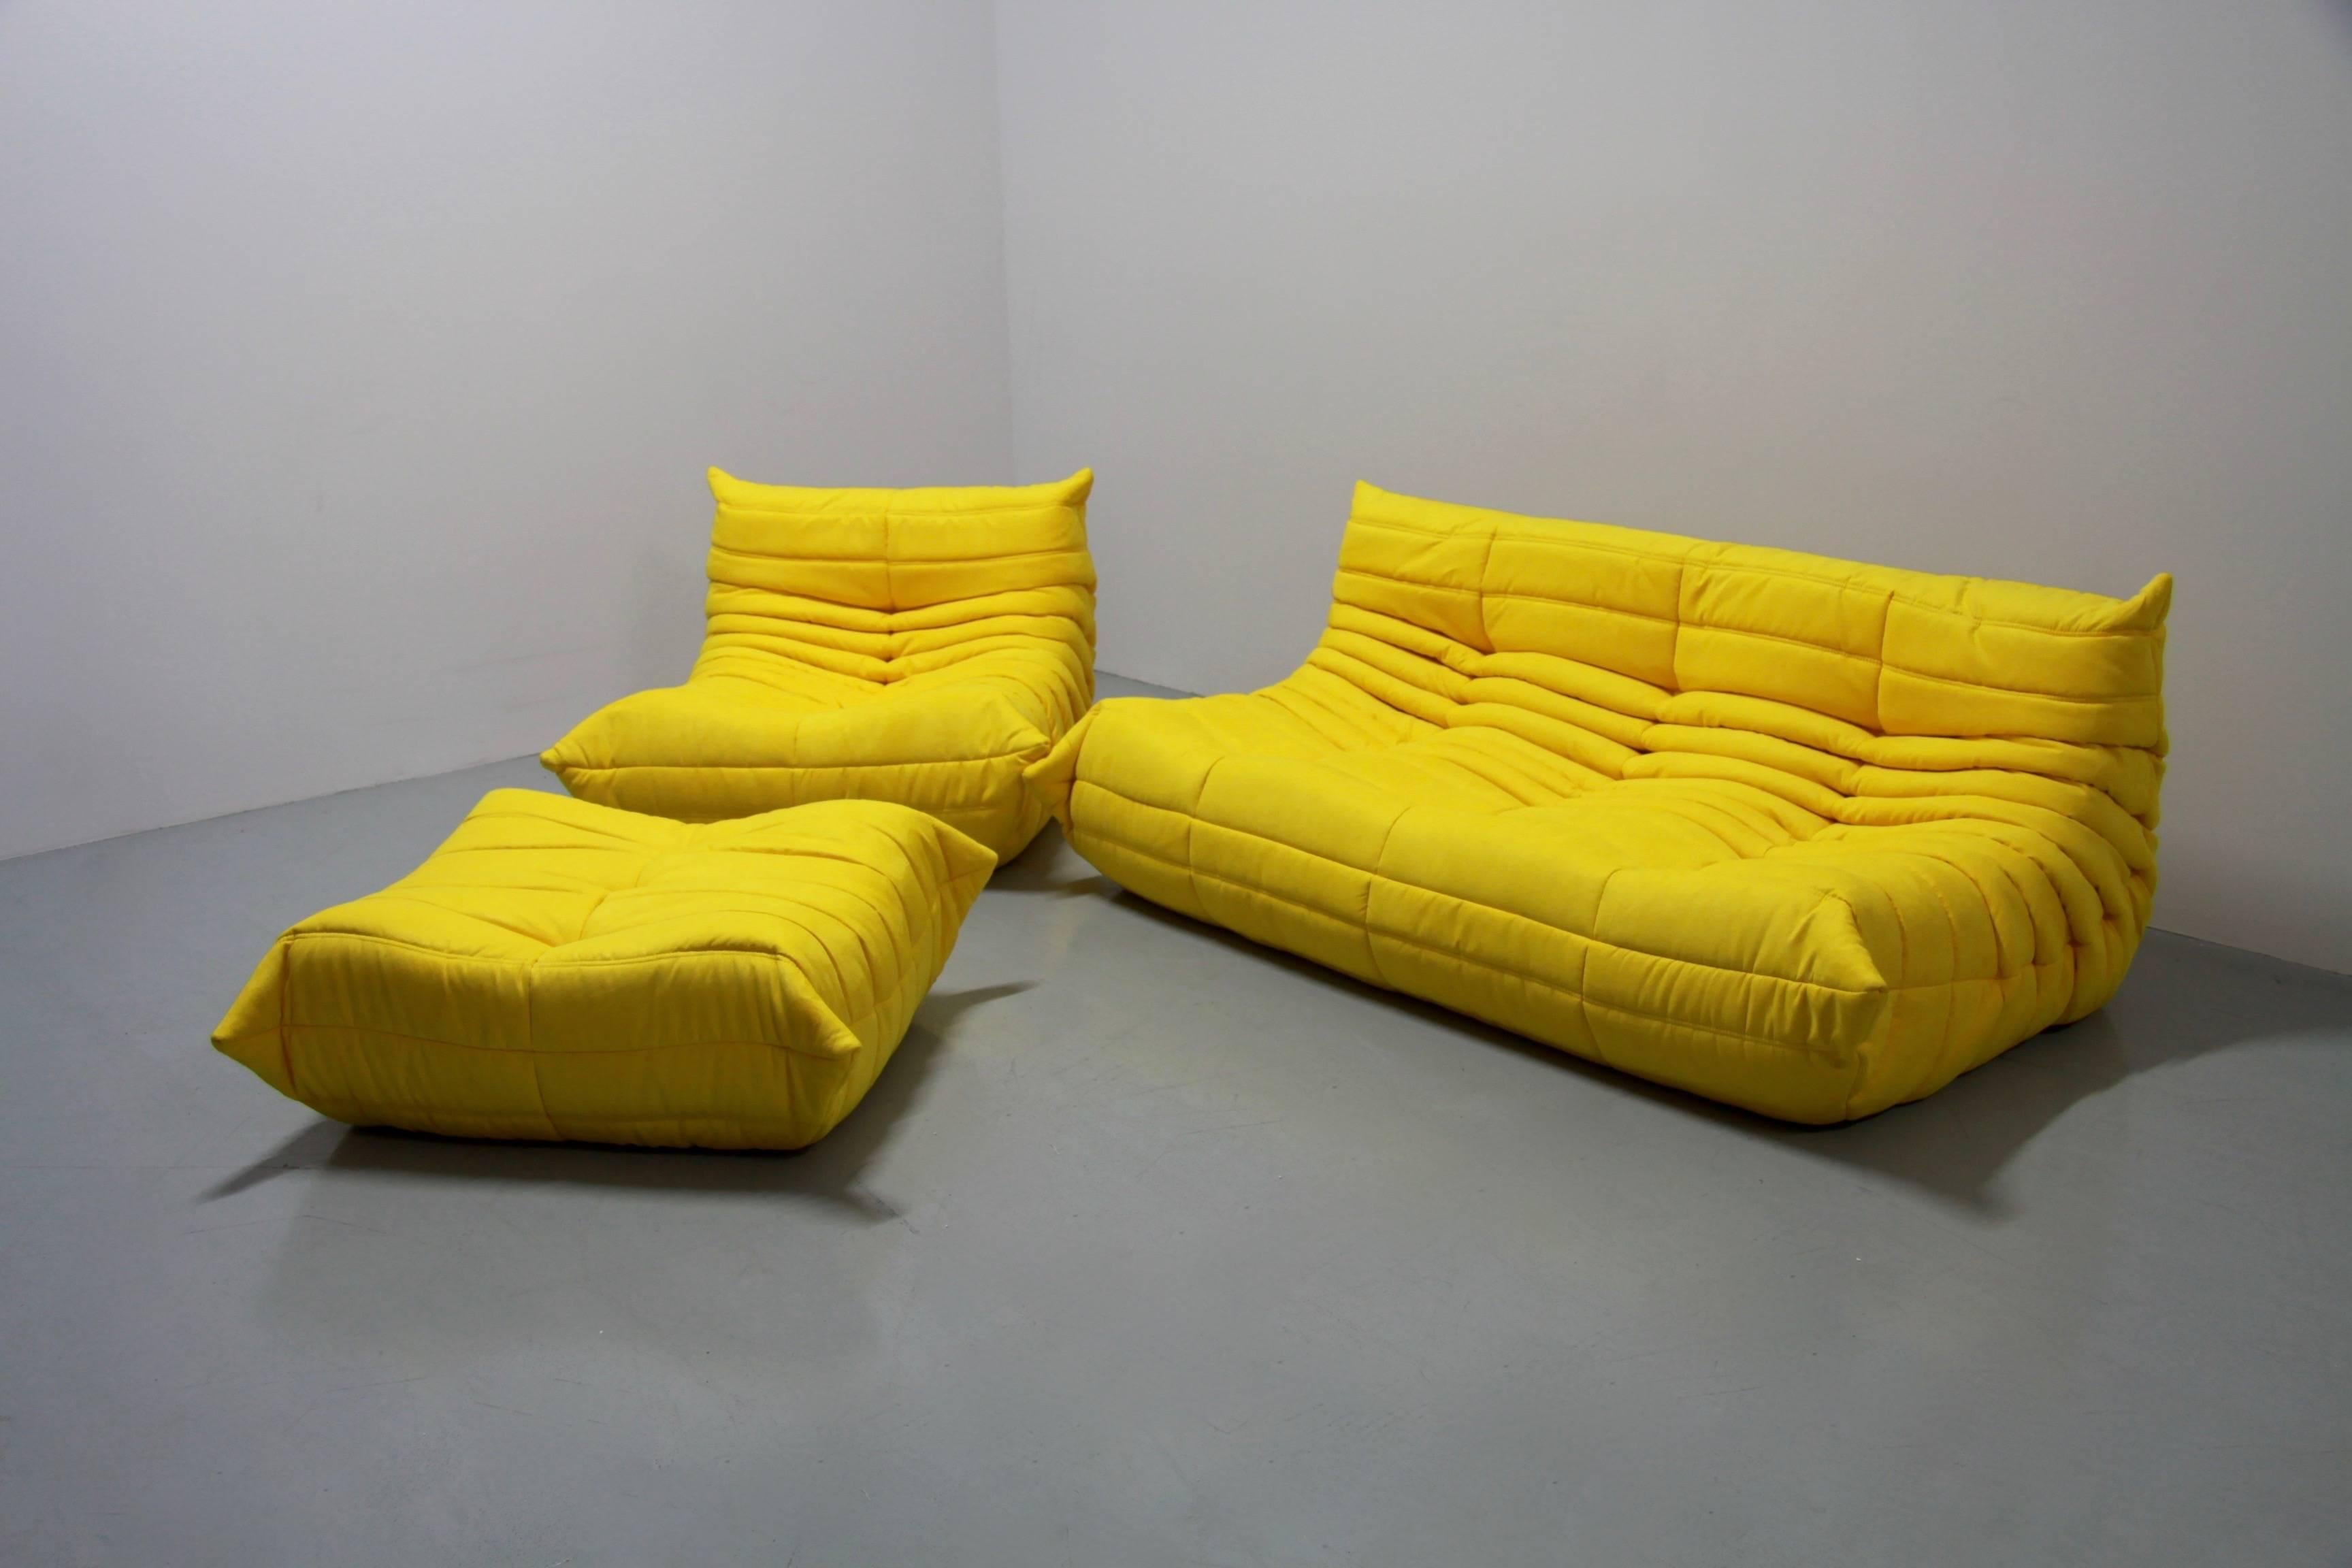 This Togo living room set was designed by Michel Ducaroy in 1974 and was manufactured by Ligne Roset in France. Each piece has the original Ligne Roset logo and genuine bottom. It has been reupholstered in yellow high quality Italvelutti microfibre